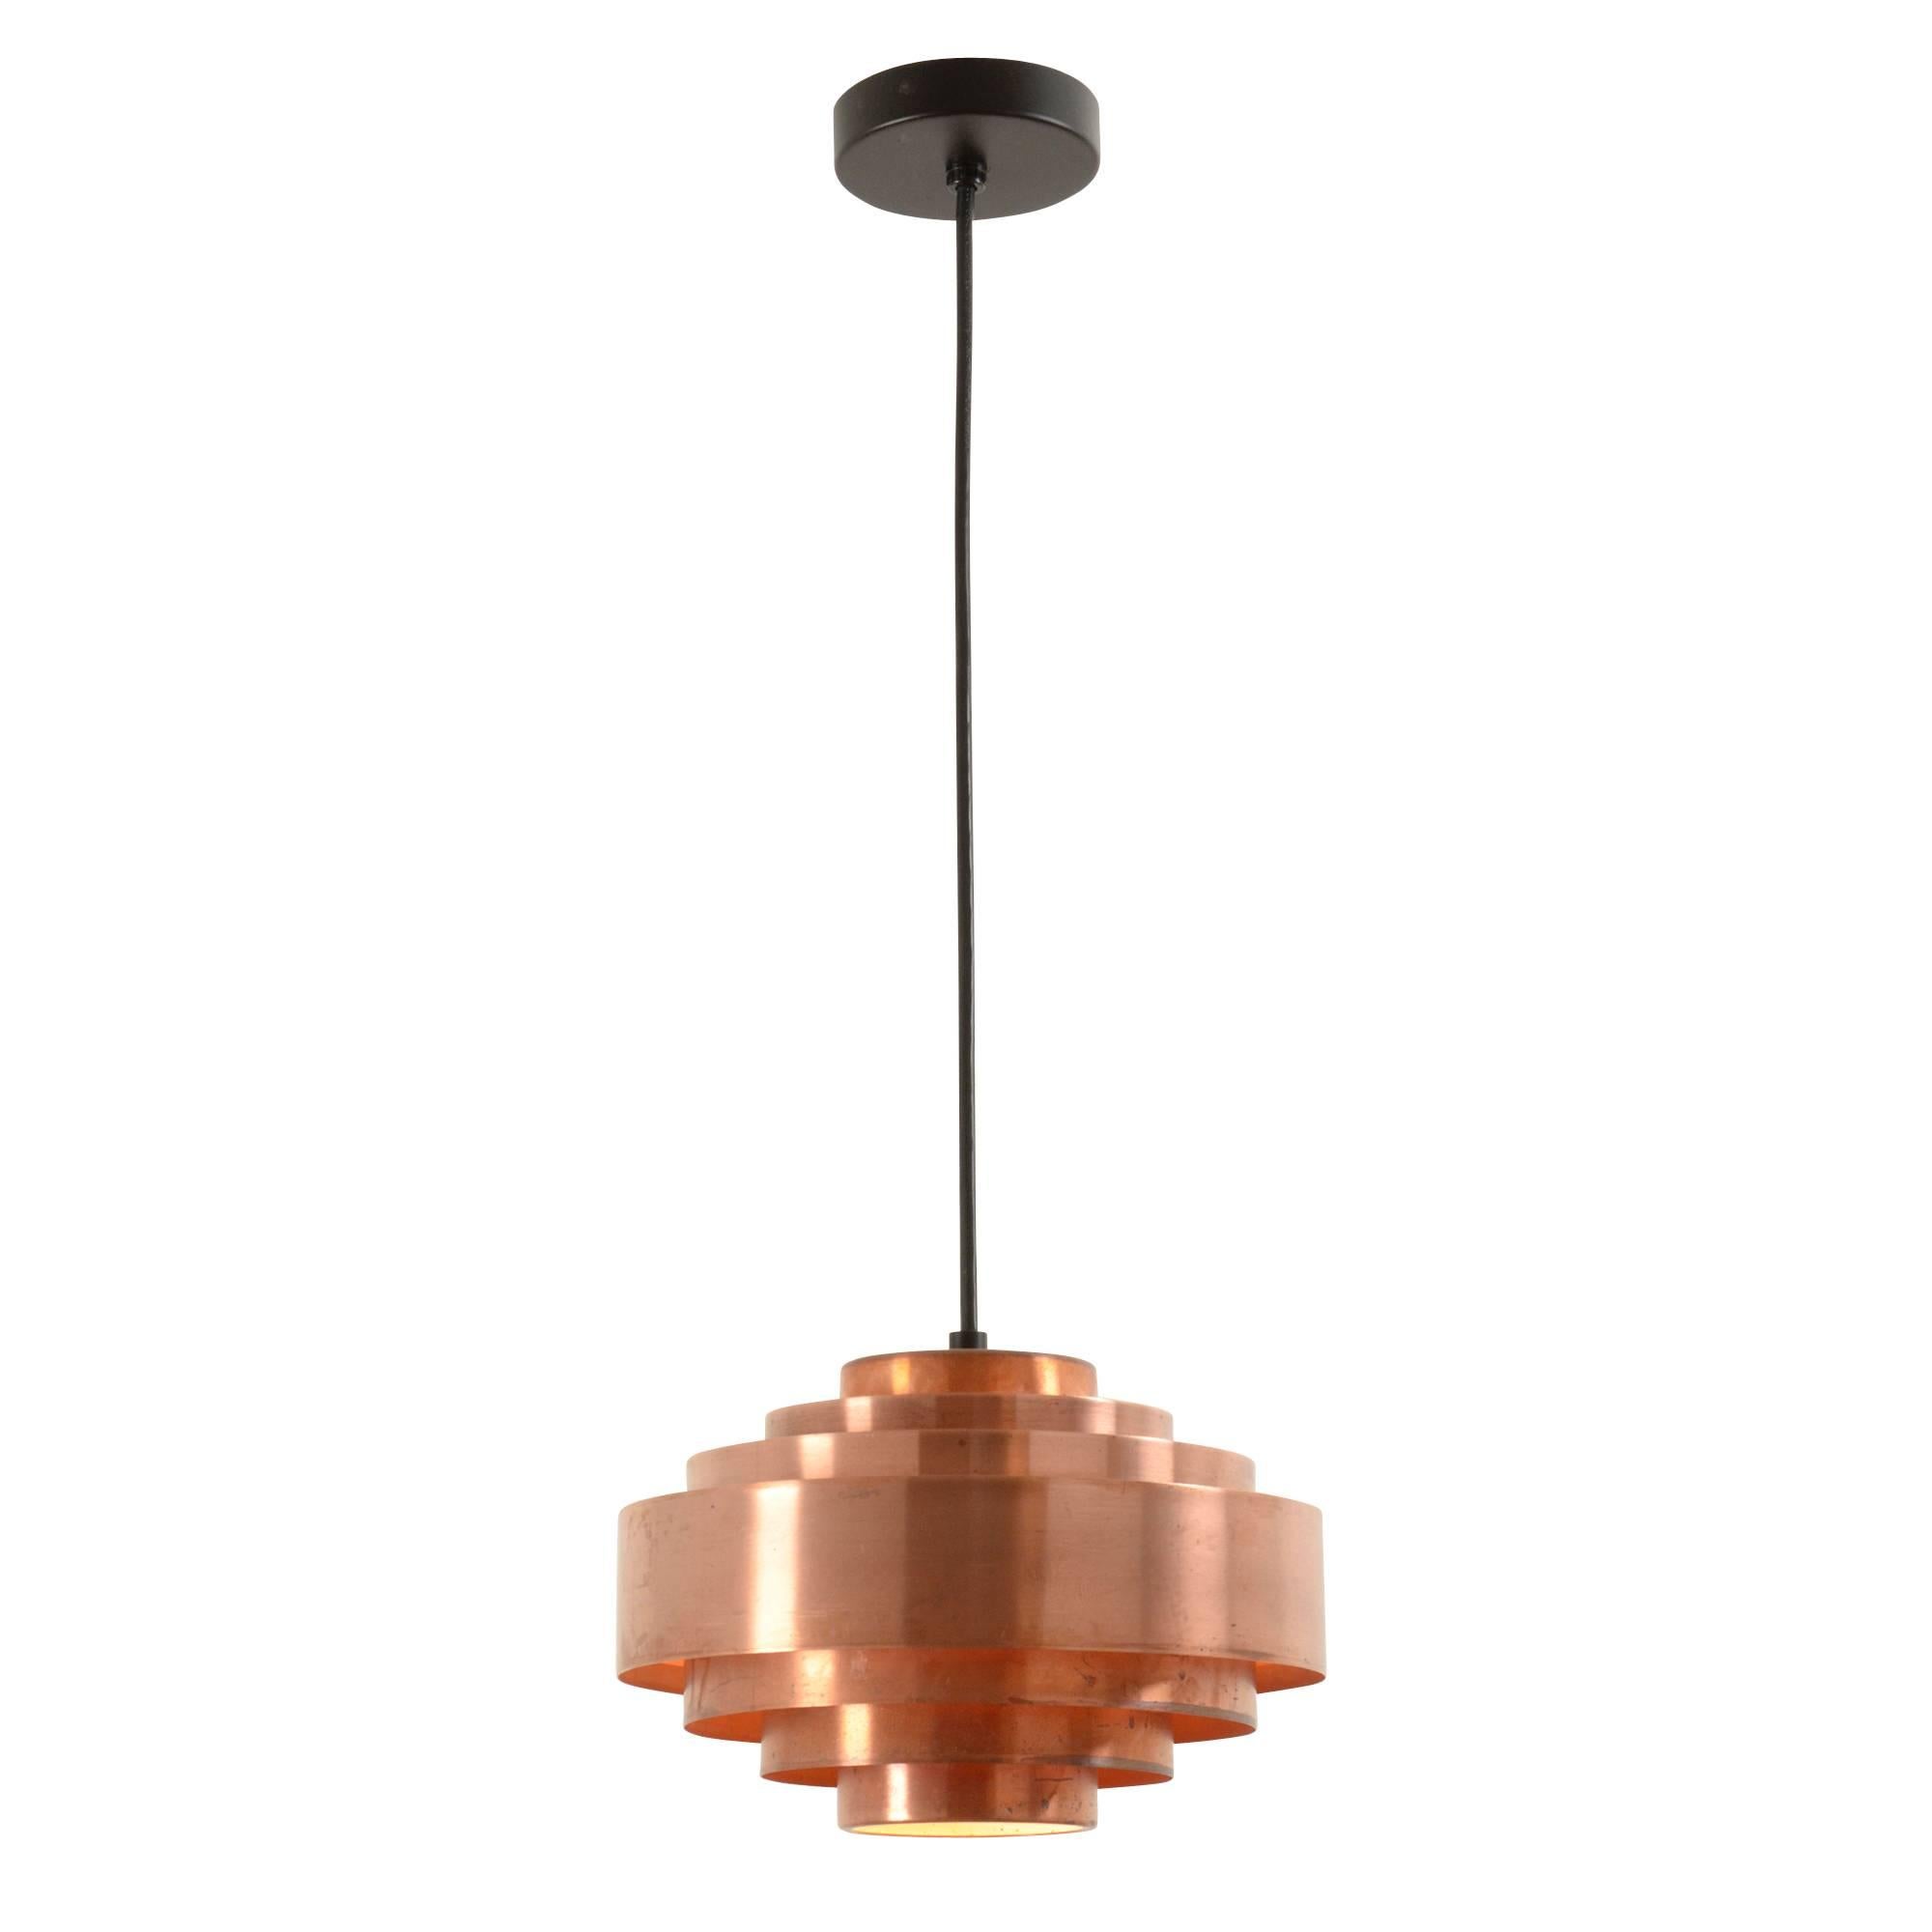 With its seven tiers of reflector rings, lightweight aluminum design, and original copper-tone lacquer, this spaceship-esque pendant is quintessentially Danish Modern. Despite its petite stature, it will still make a design statement in many home,